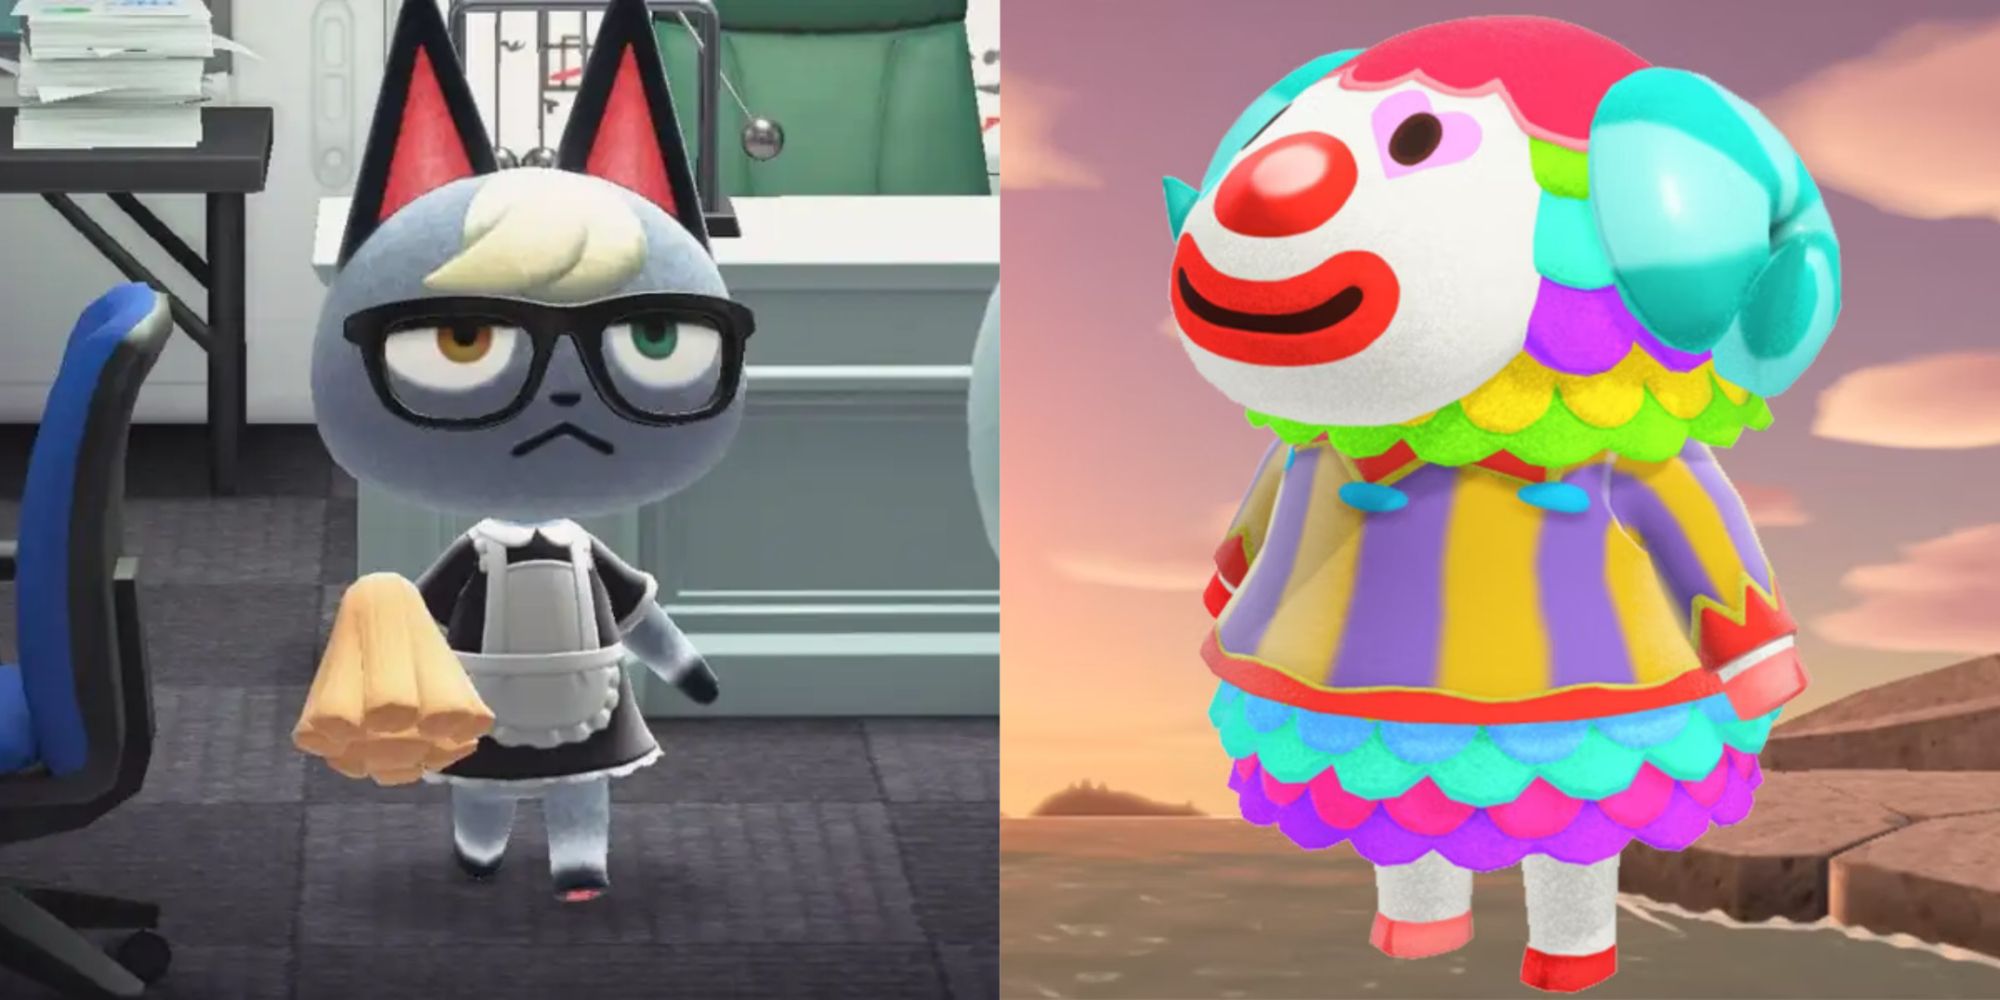 raymond the cat villager and pietro the sheep villager in animal crossing: new horizons